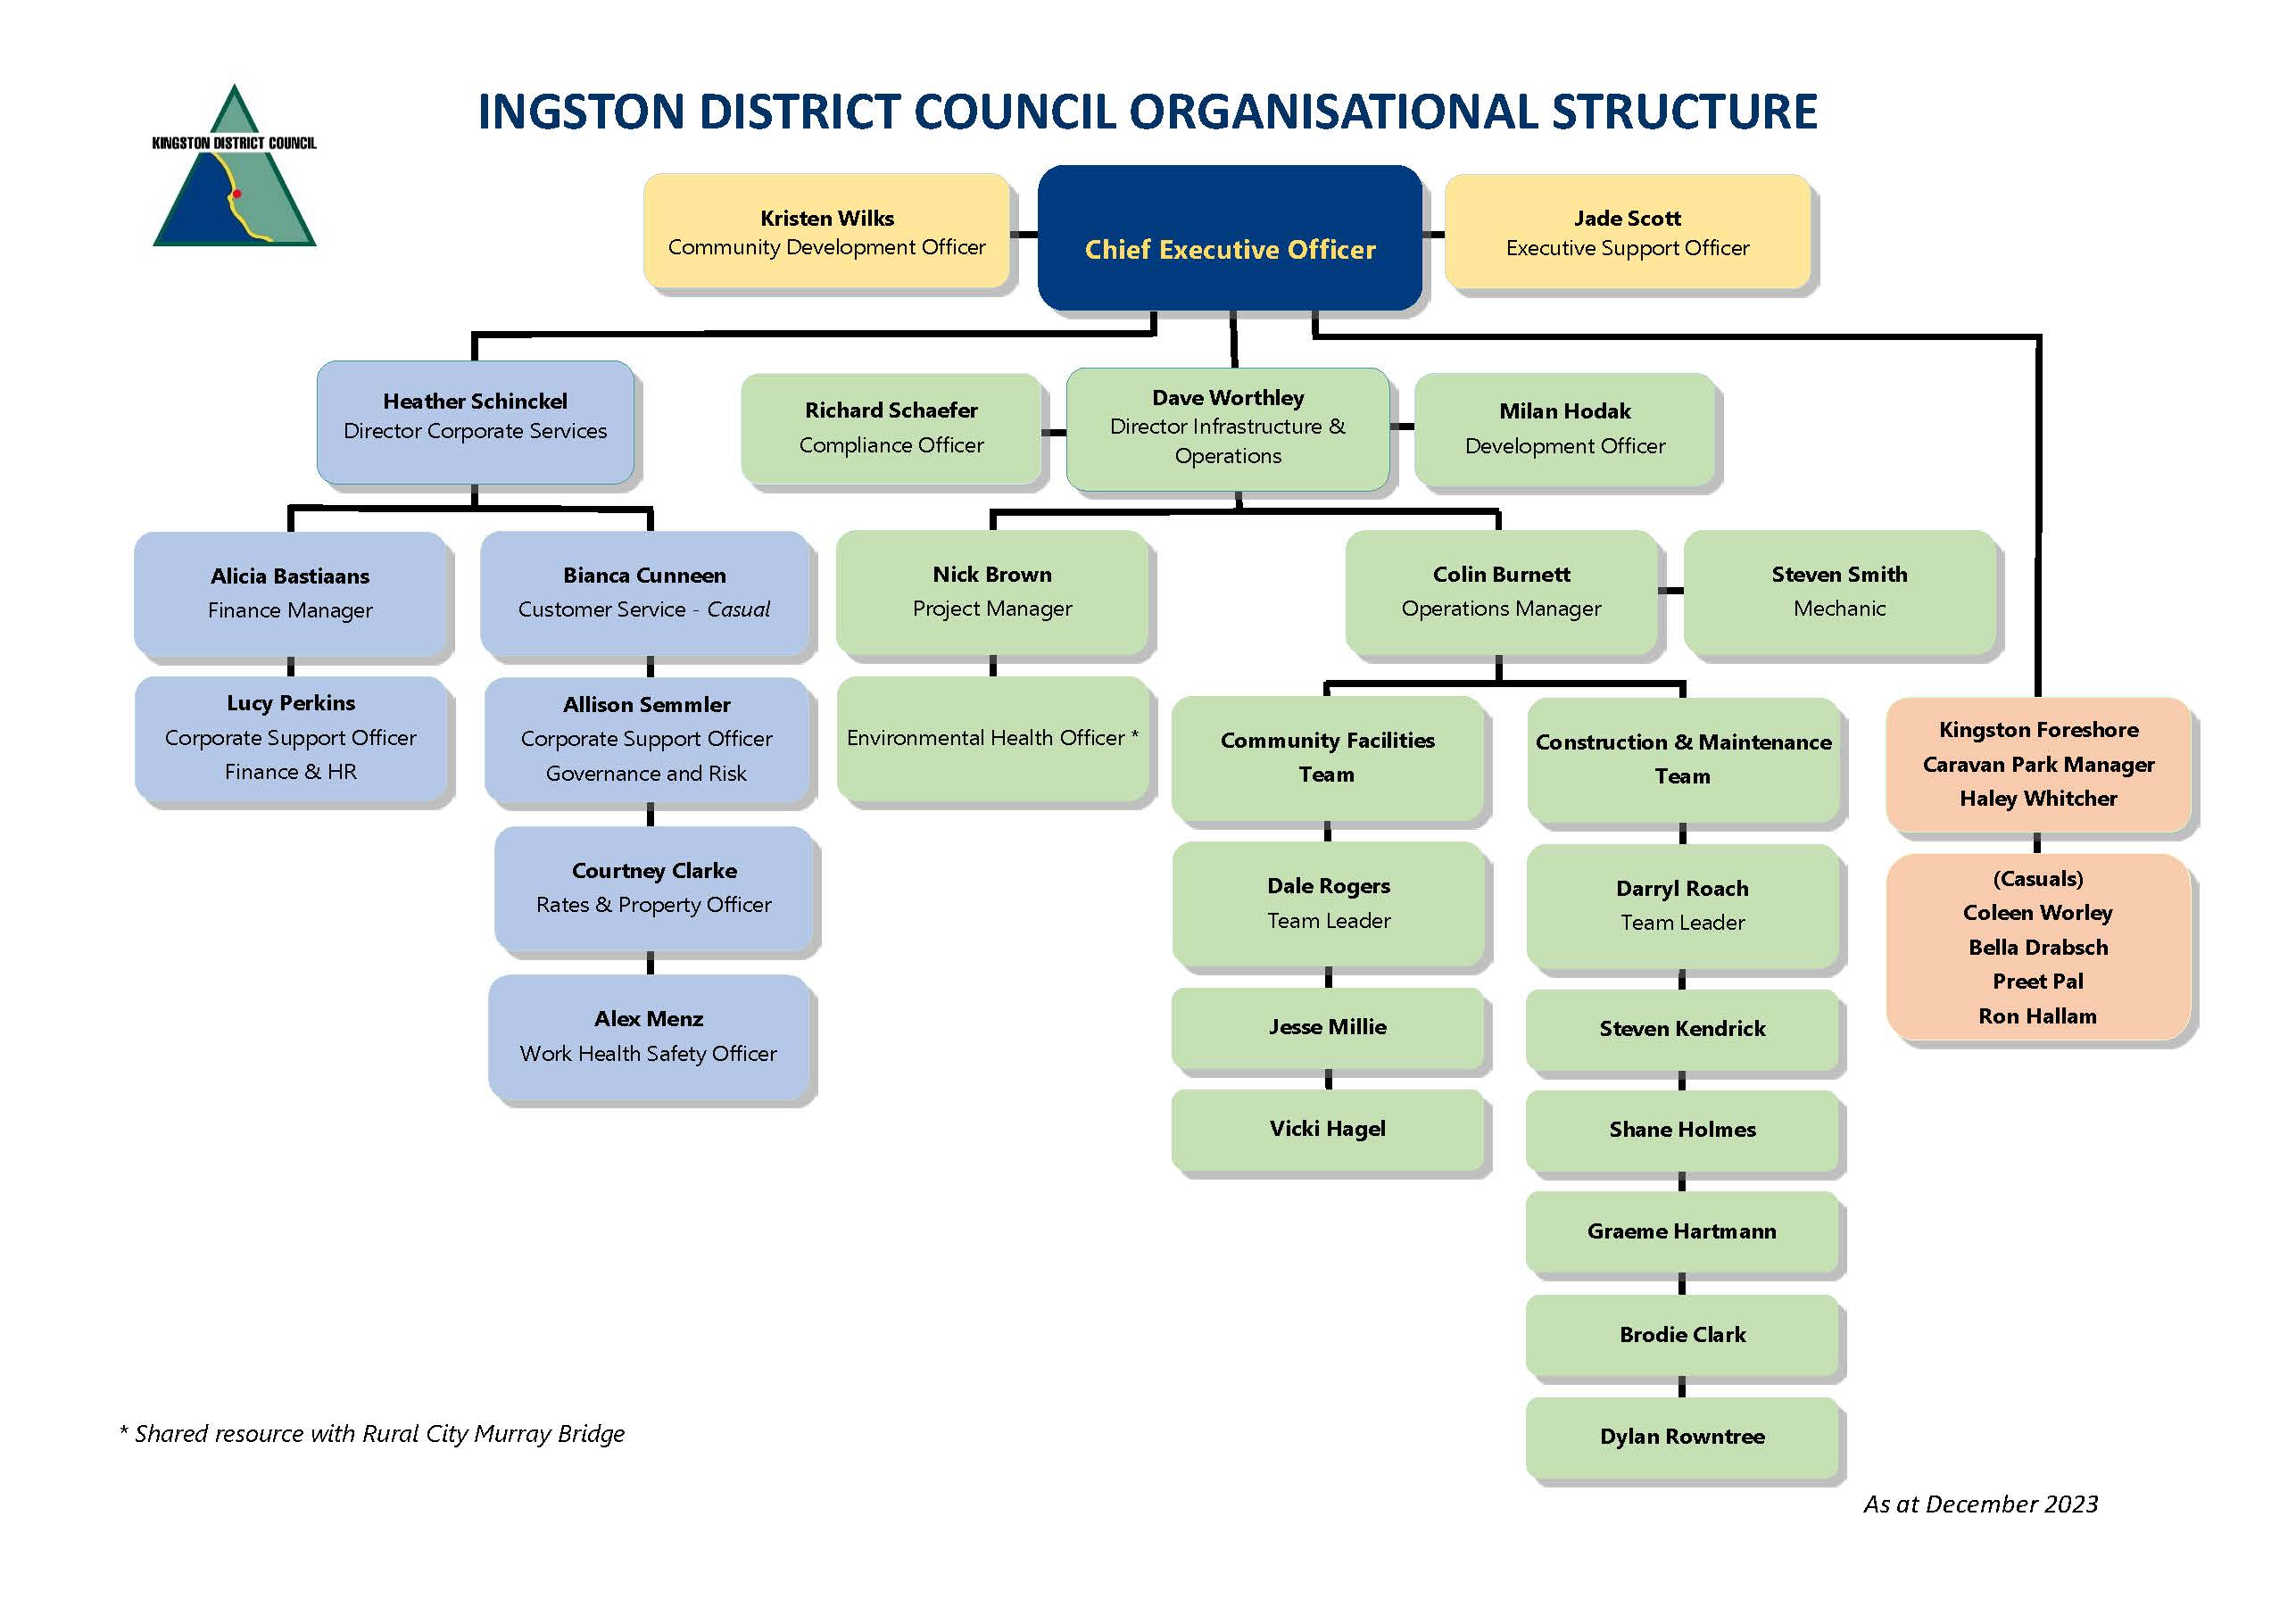 Organisational Structure as at December 2023